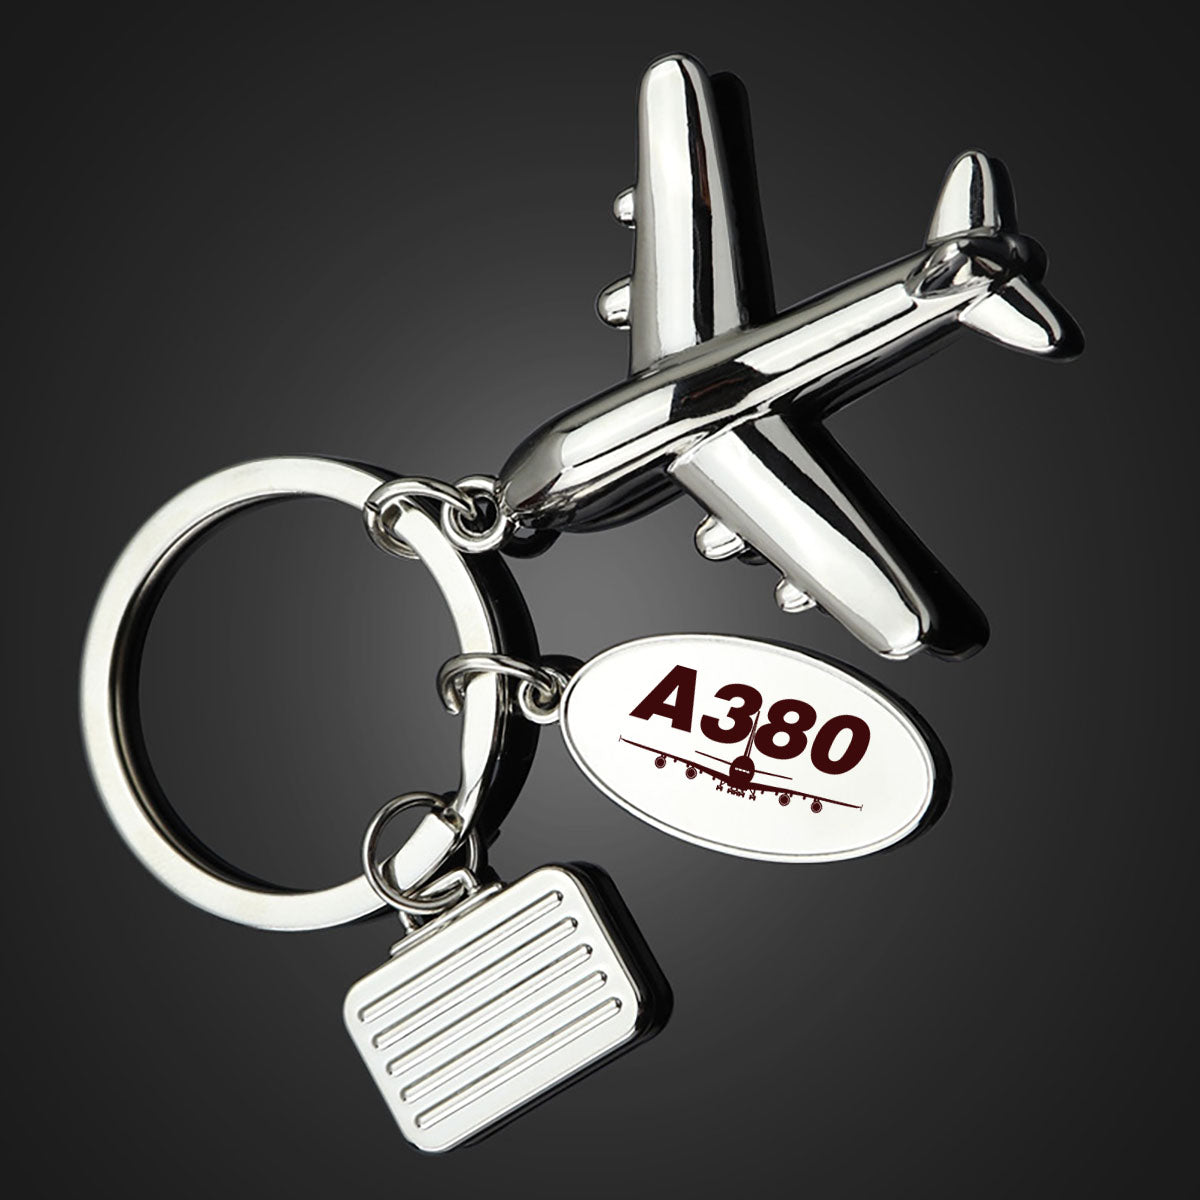 Super Airbus A380 Designed Suitcase Airplane Key Chains